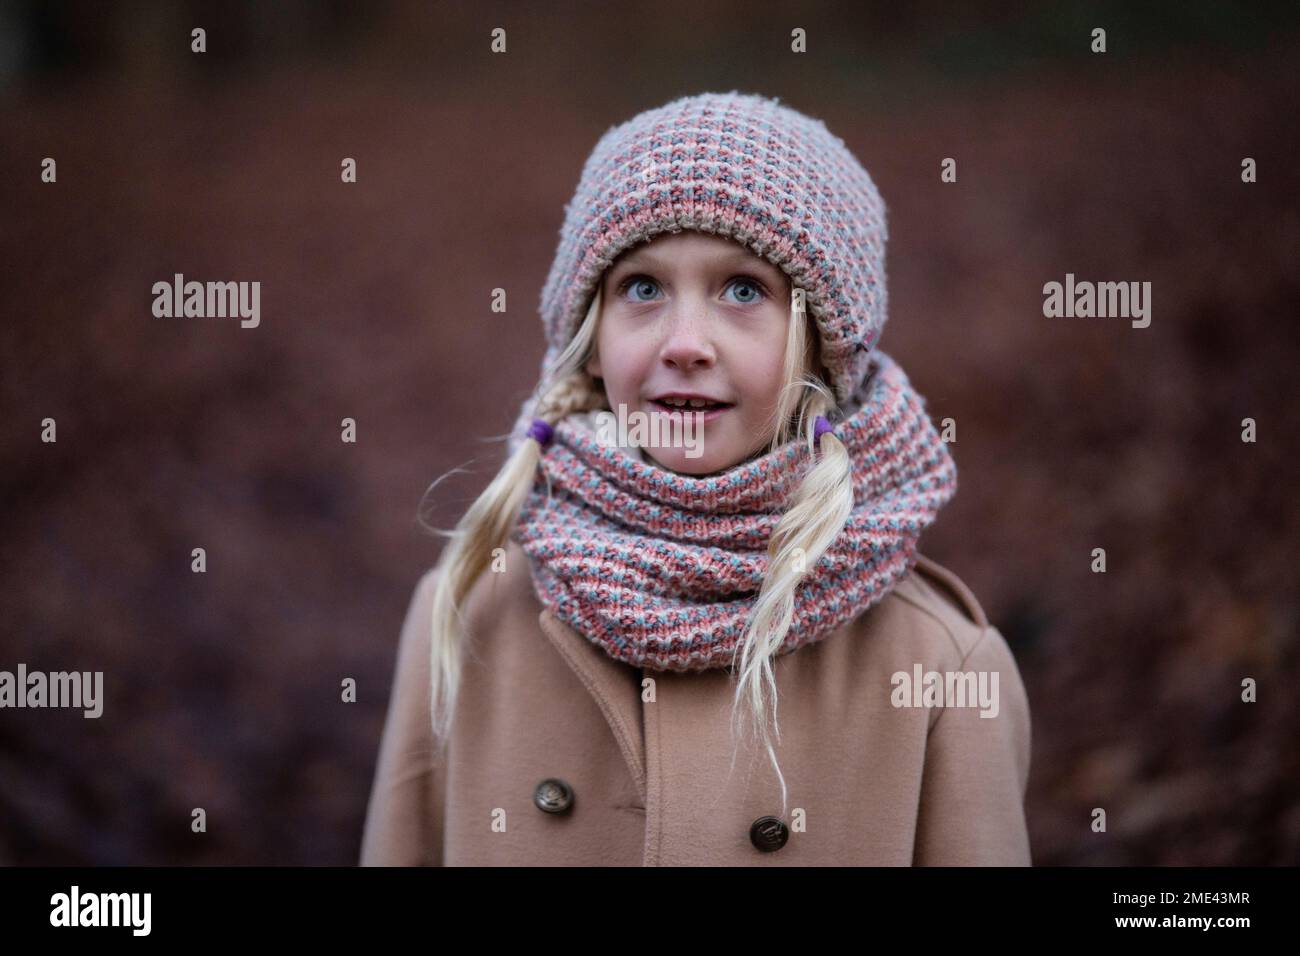 Smiling blond girl wearing knit hat and scarf Stock Photo